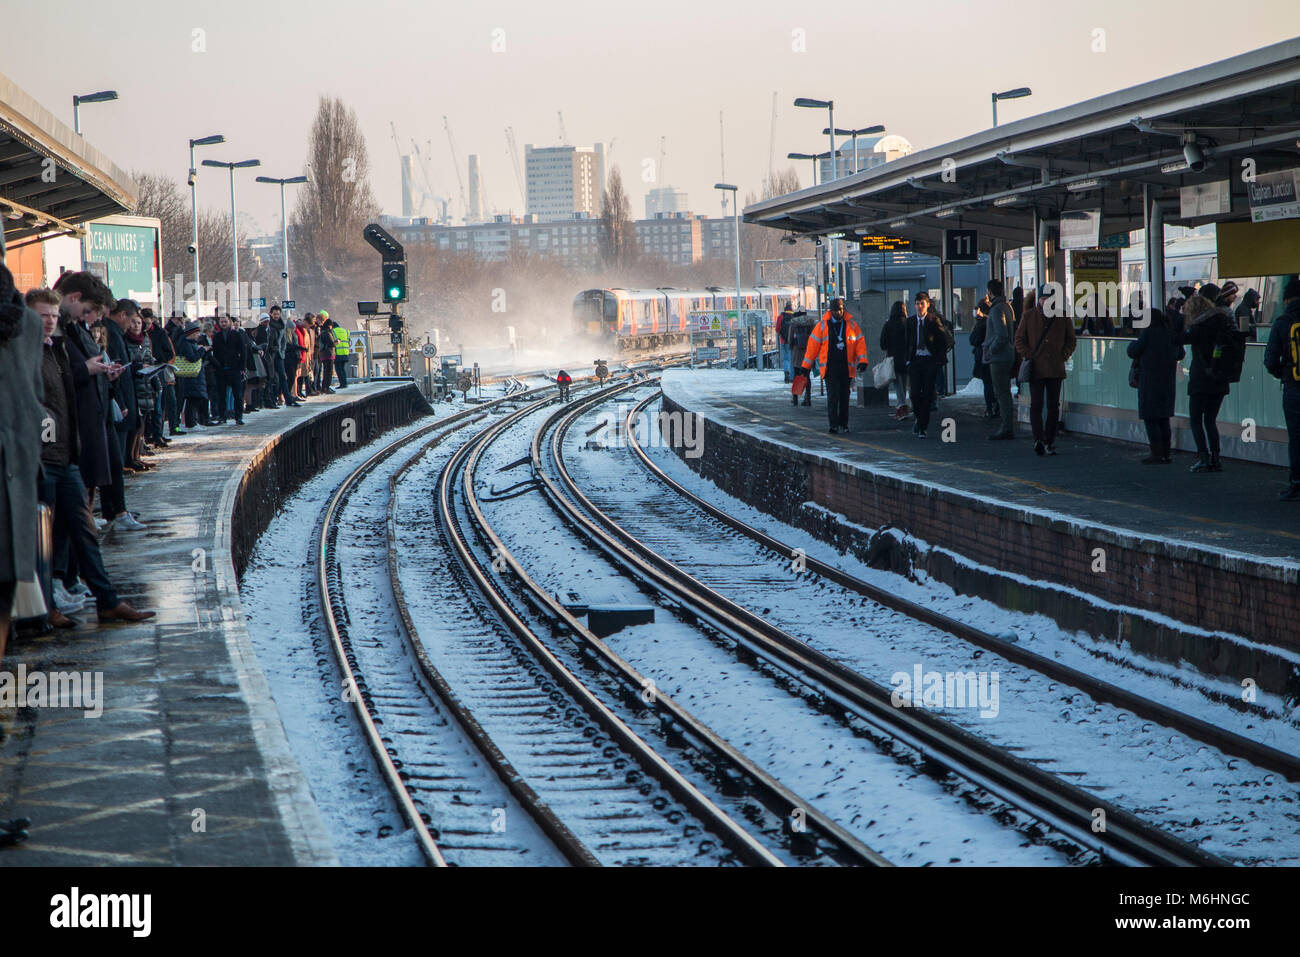 Clapham Junction train station with delays for commuters as a South Western train leaves the platform Stock Photo